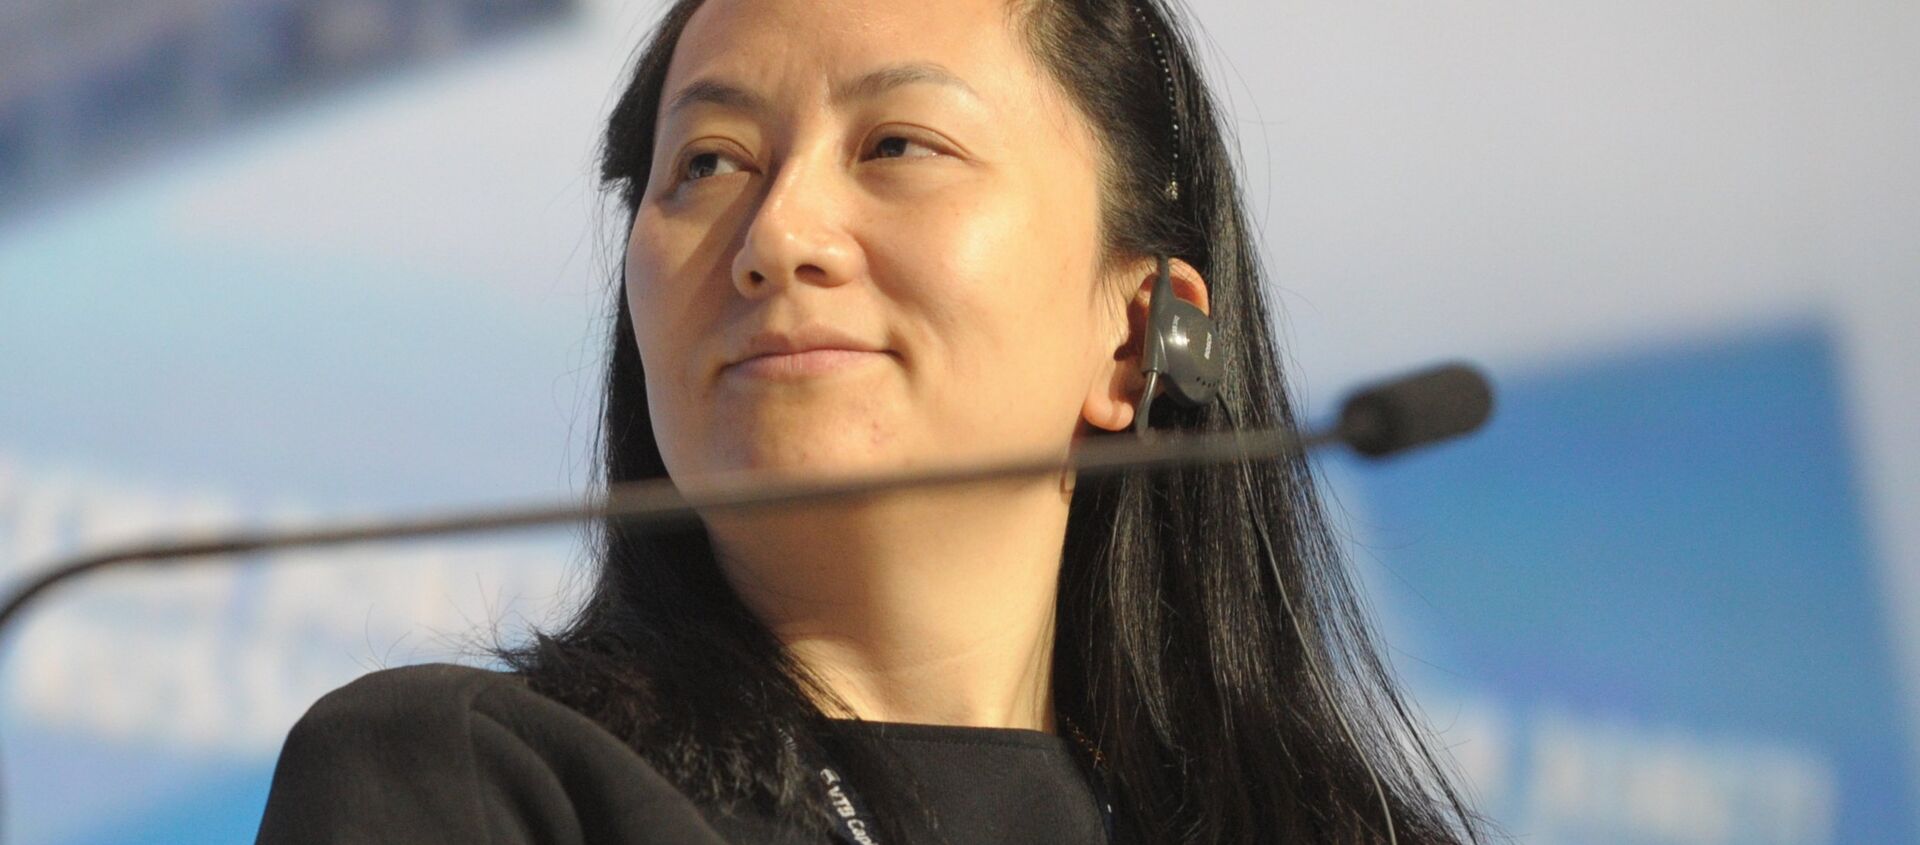 Meng Wanzhou, Chief Executive Officer, Huawei Technologies, attending the 6th Annual VTB Capital Investment Forum Russia Calling at the World Trade Center, October 2, 2014 - Sputnik International, 1920, 01.12.2020